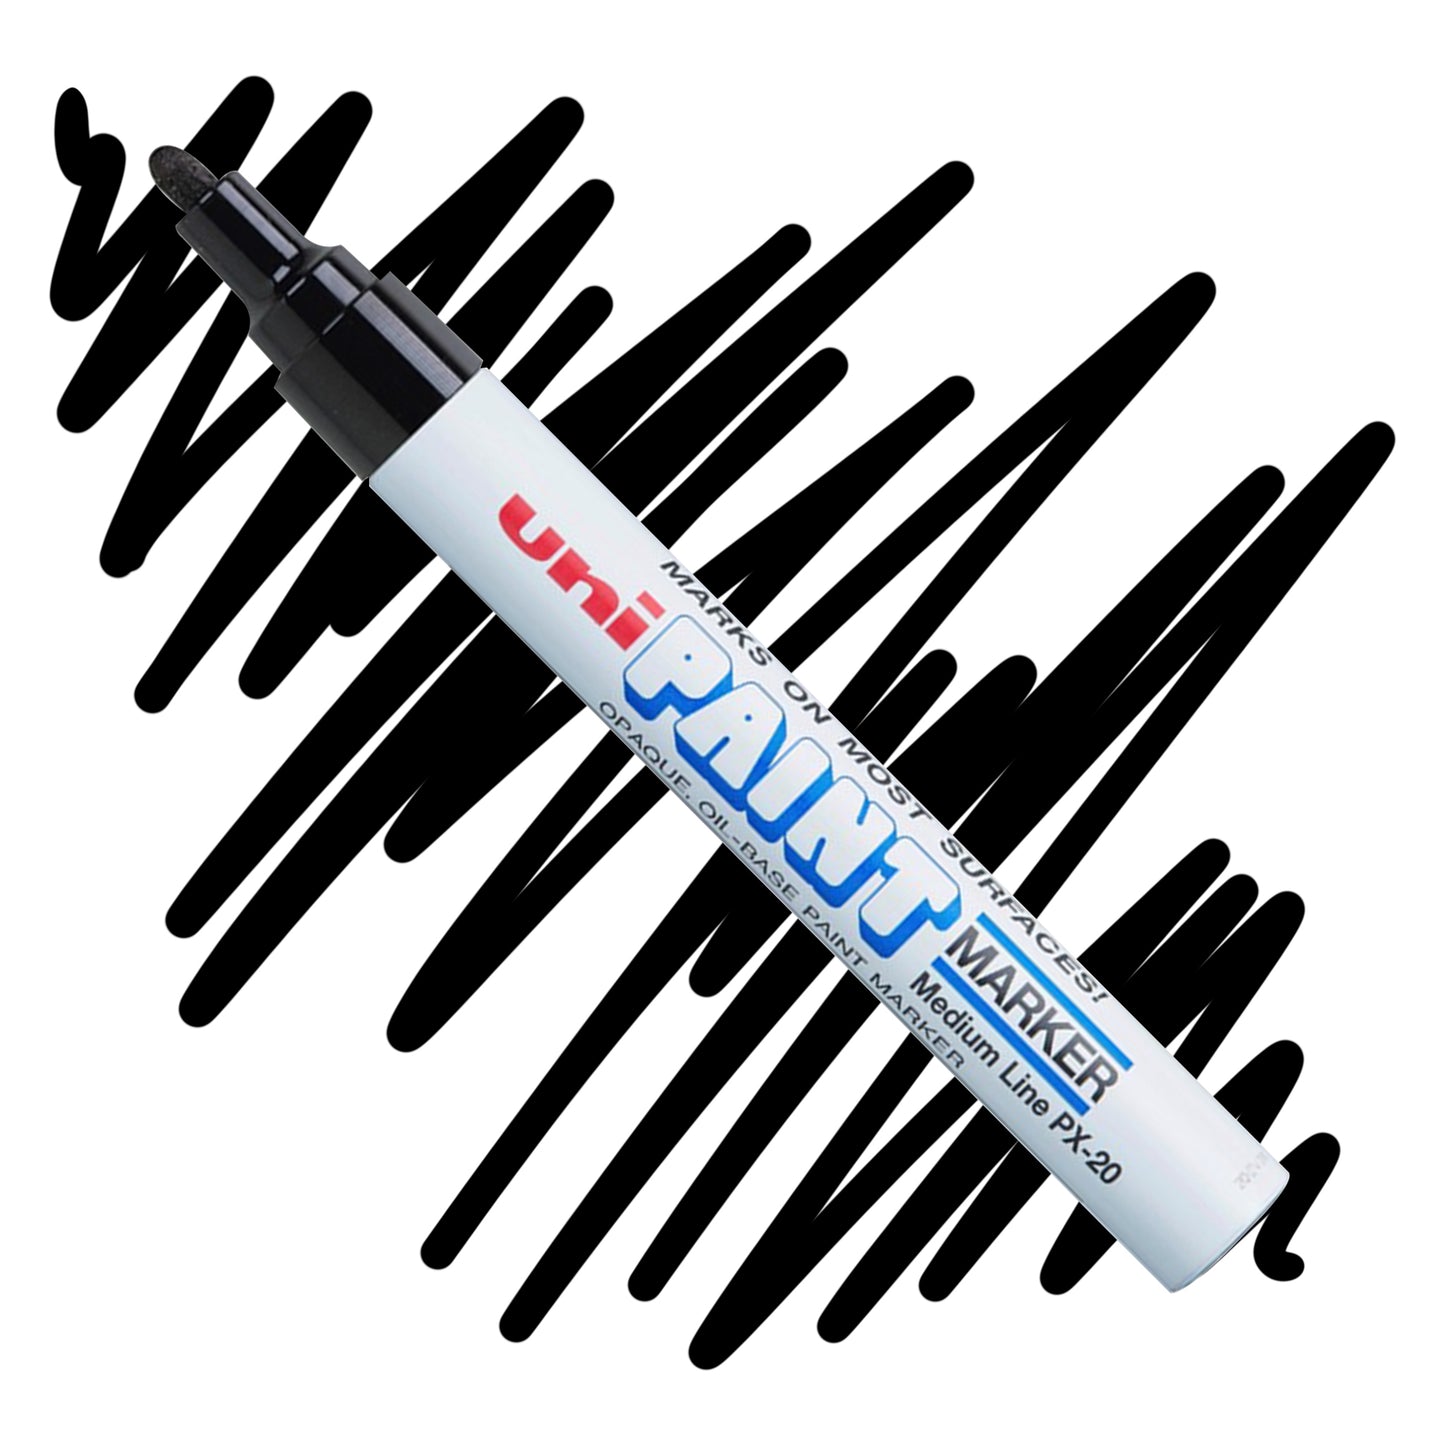 A white marker angled diagonally, the tip of the marker and the nib are colored black. On the marker body the label reads "Uni PAINT Maker". Behind the marker is a color swatch of a squiggly line in black.